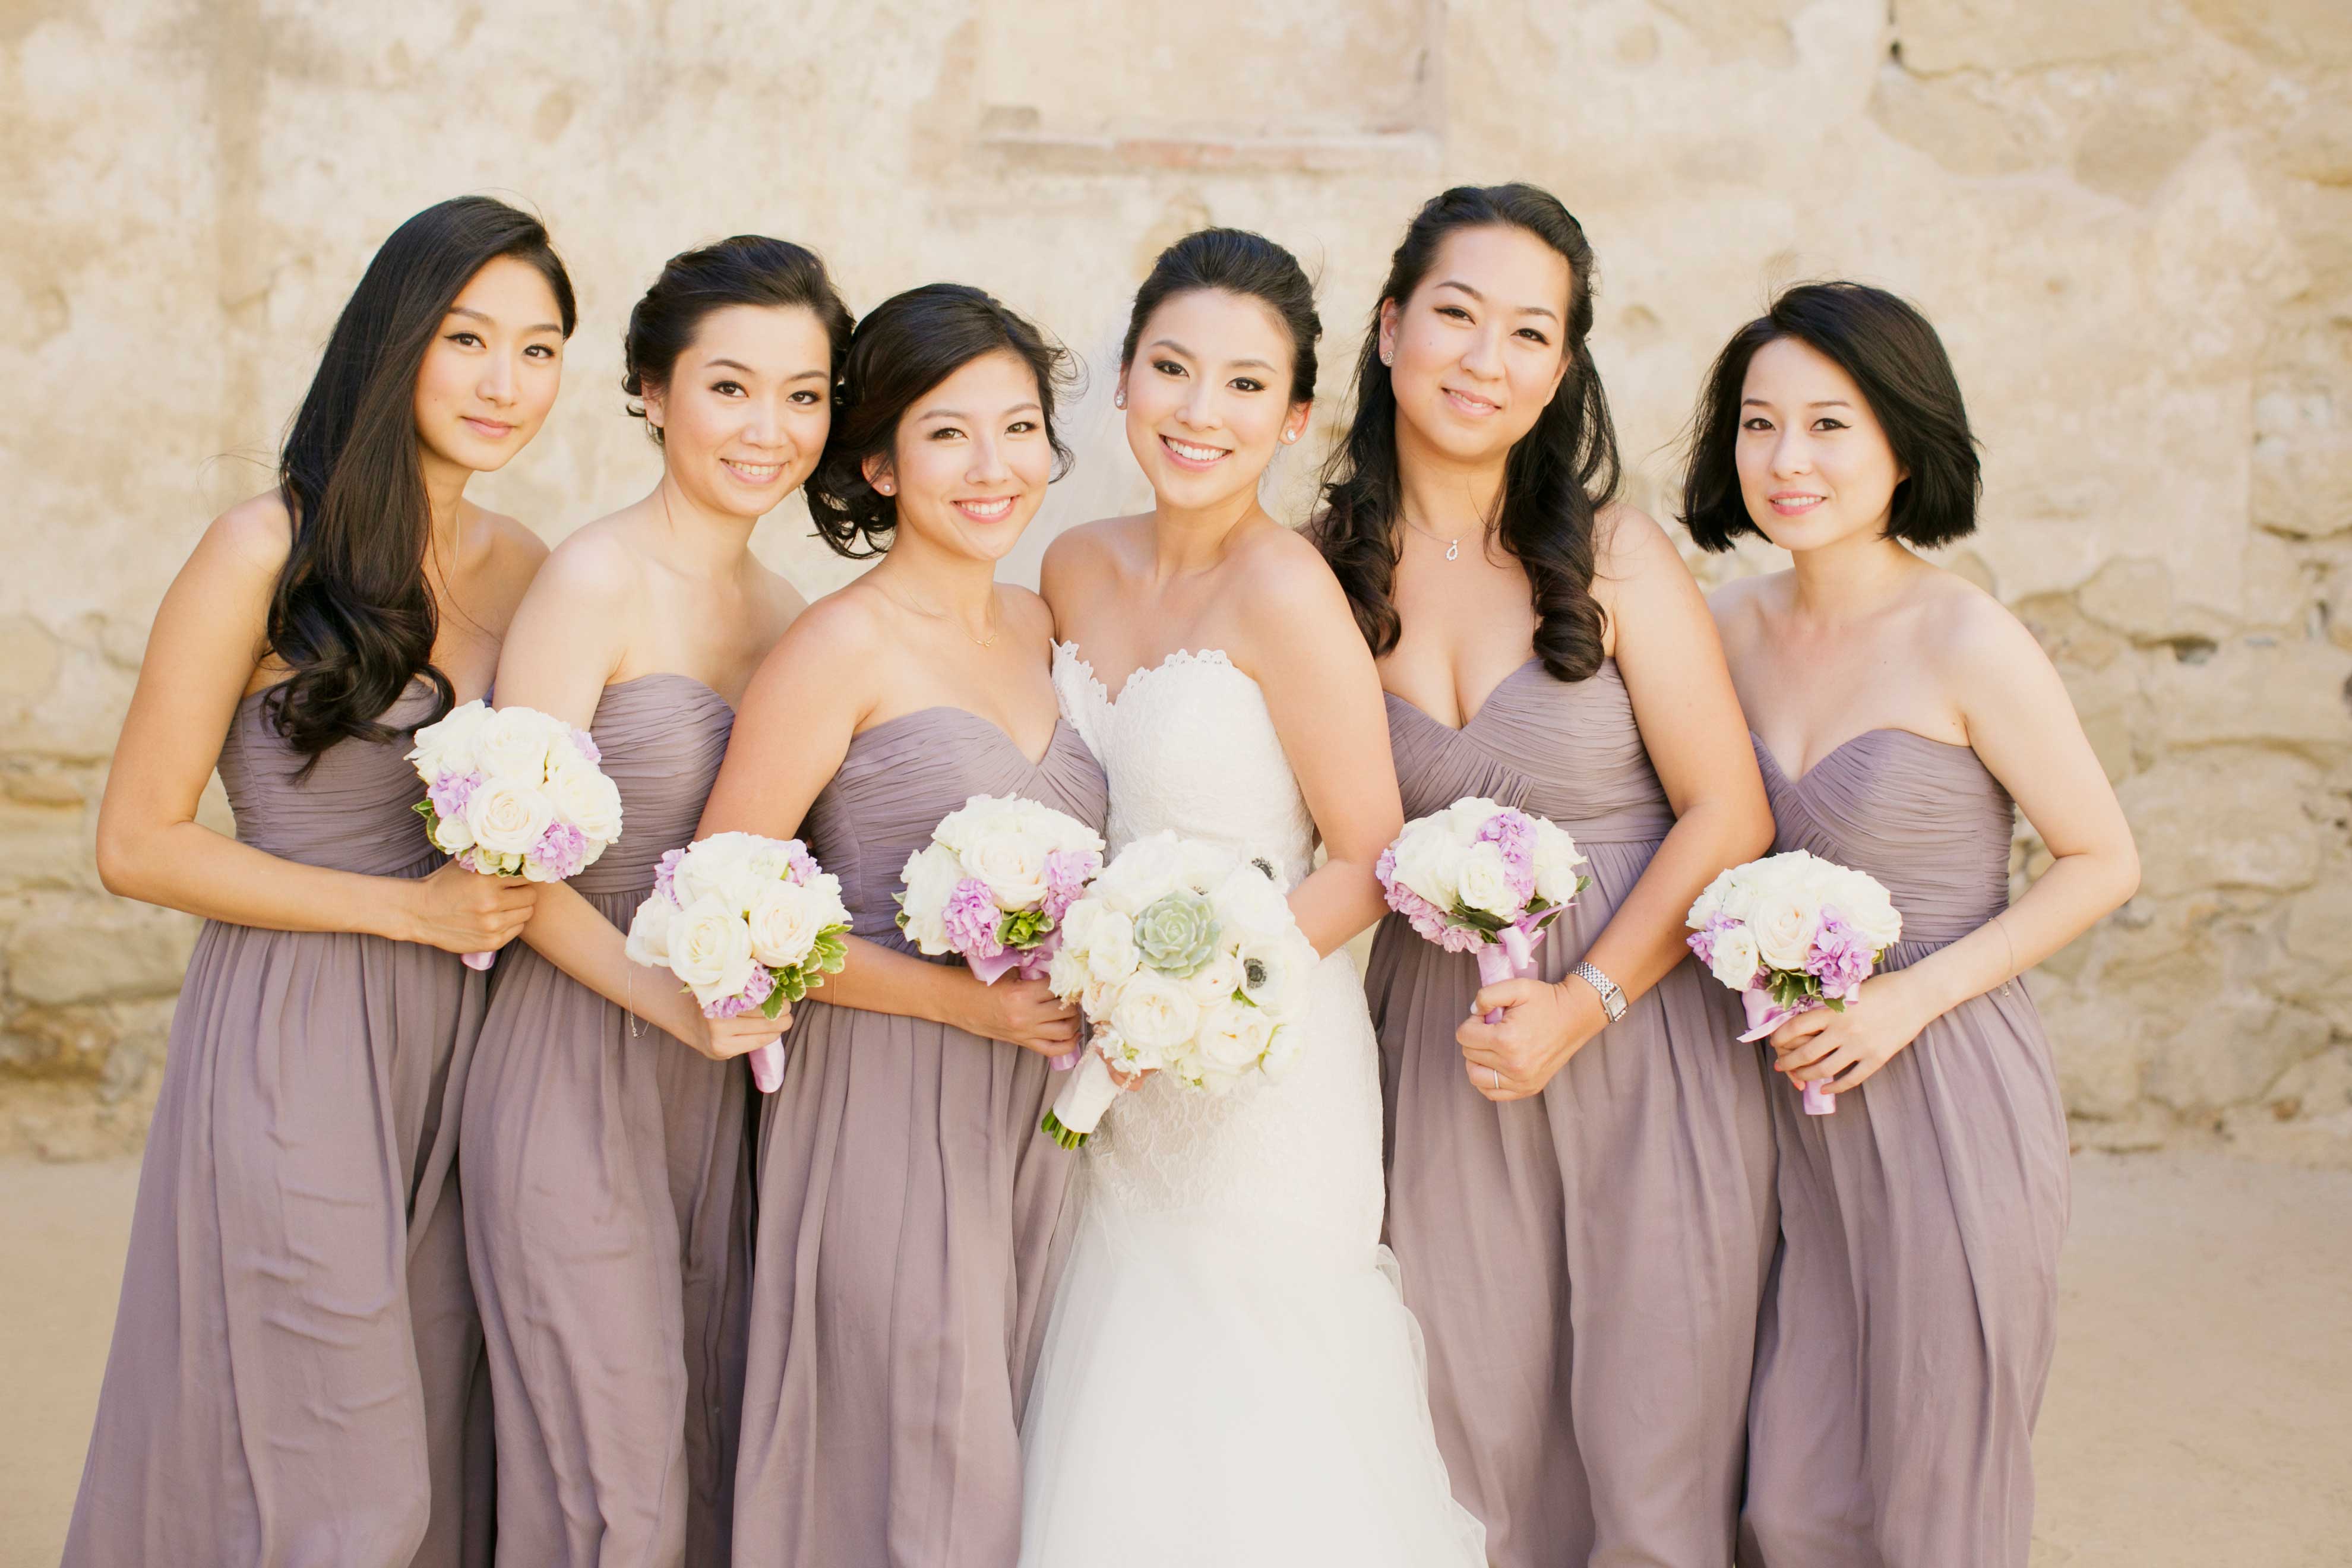 How to Deal with Bridesmaids Who Don't Get Along - Inside Weddings